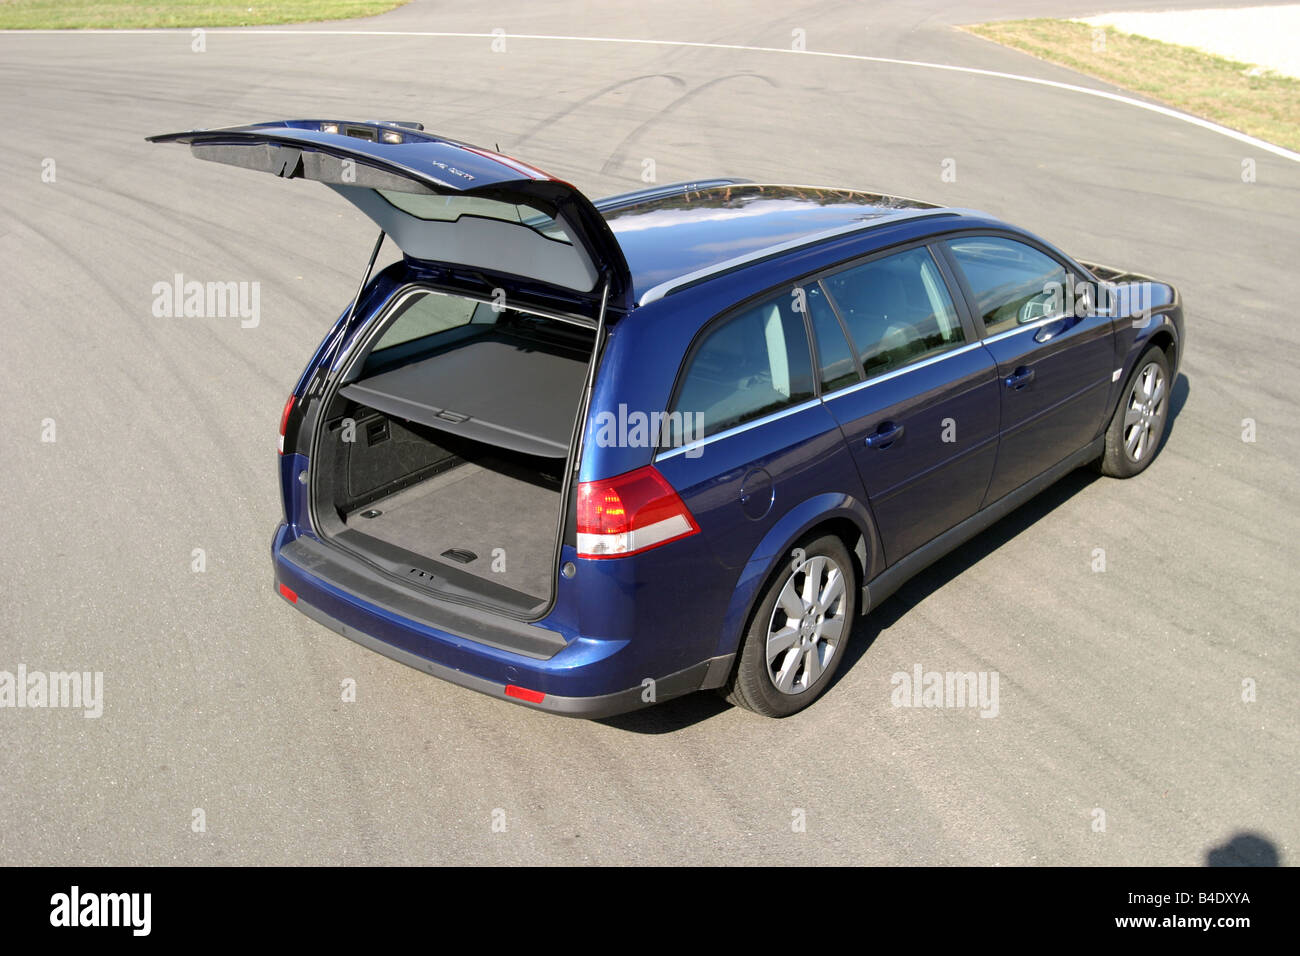 Car, Opel Vectra 3.0 CDTi, medium class, hatchback, model year 2003-, blue, FGHDS, standing, upholding, diagonal from the back/o Stock Photo